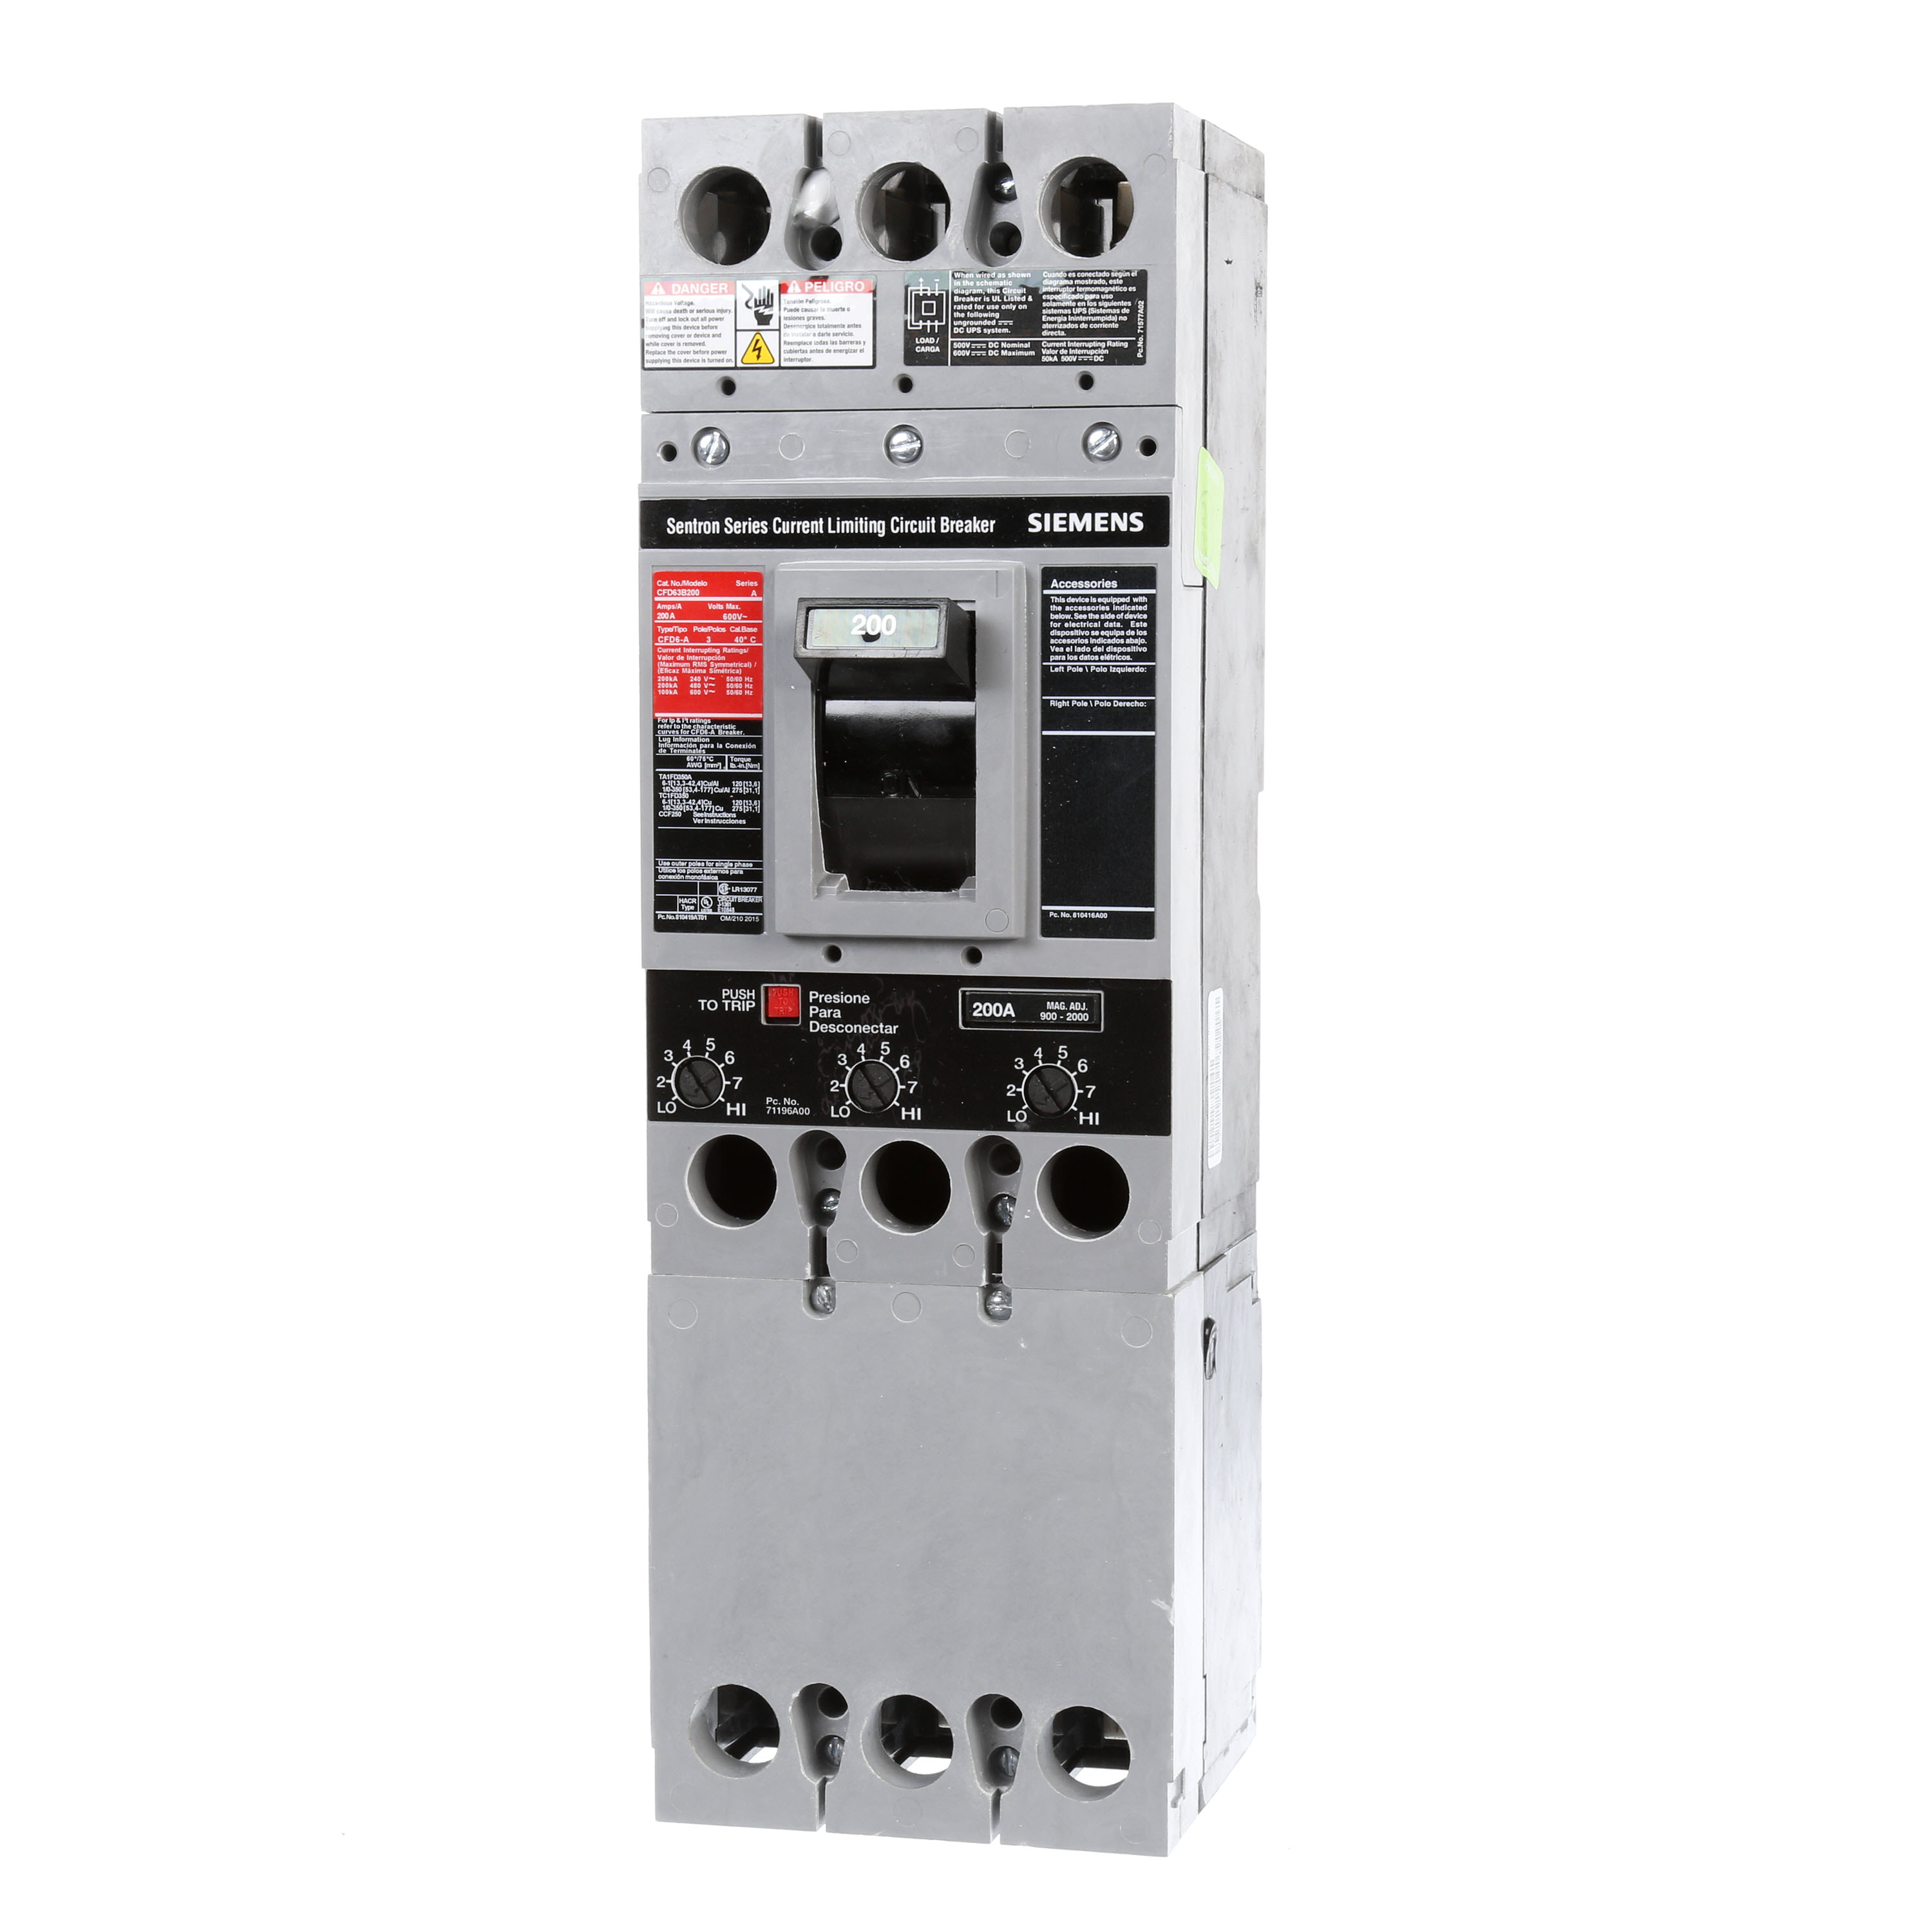 SIEMENS LOW VOLTAGE SENTRON MOLDED CASE CIRCUIT BREAKER WITH THERMAL - MAGNETICTRIP UNIT. UN-ASSEMBLED STANDARD 40 DEG C BREAKER FD FRAME WITH STANDARD BREAKING CAPACITY. 200A 3-POLE (22KAIC AT 600V) (35KAIC AT 480V). INTERCHANGEABLE TRIPUNIT. SPECIAL FEATURES LINE AND LOAD SIDE LUGS (TA1FD350A) WIRE RANGE 6AWG - 350KCMIL (CU) / 4AWG - 350KCMIL (AL). DIMENSIONS (W x H x D) IN 4.50 x 9.5 x 4.00.